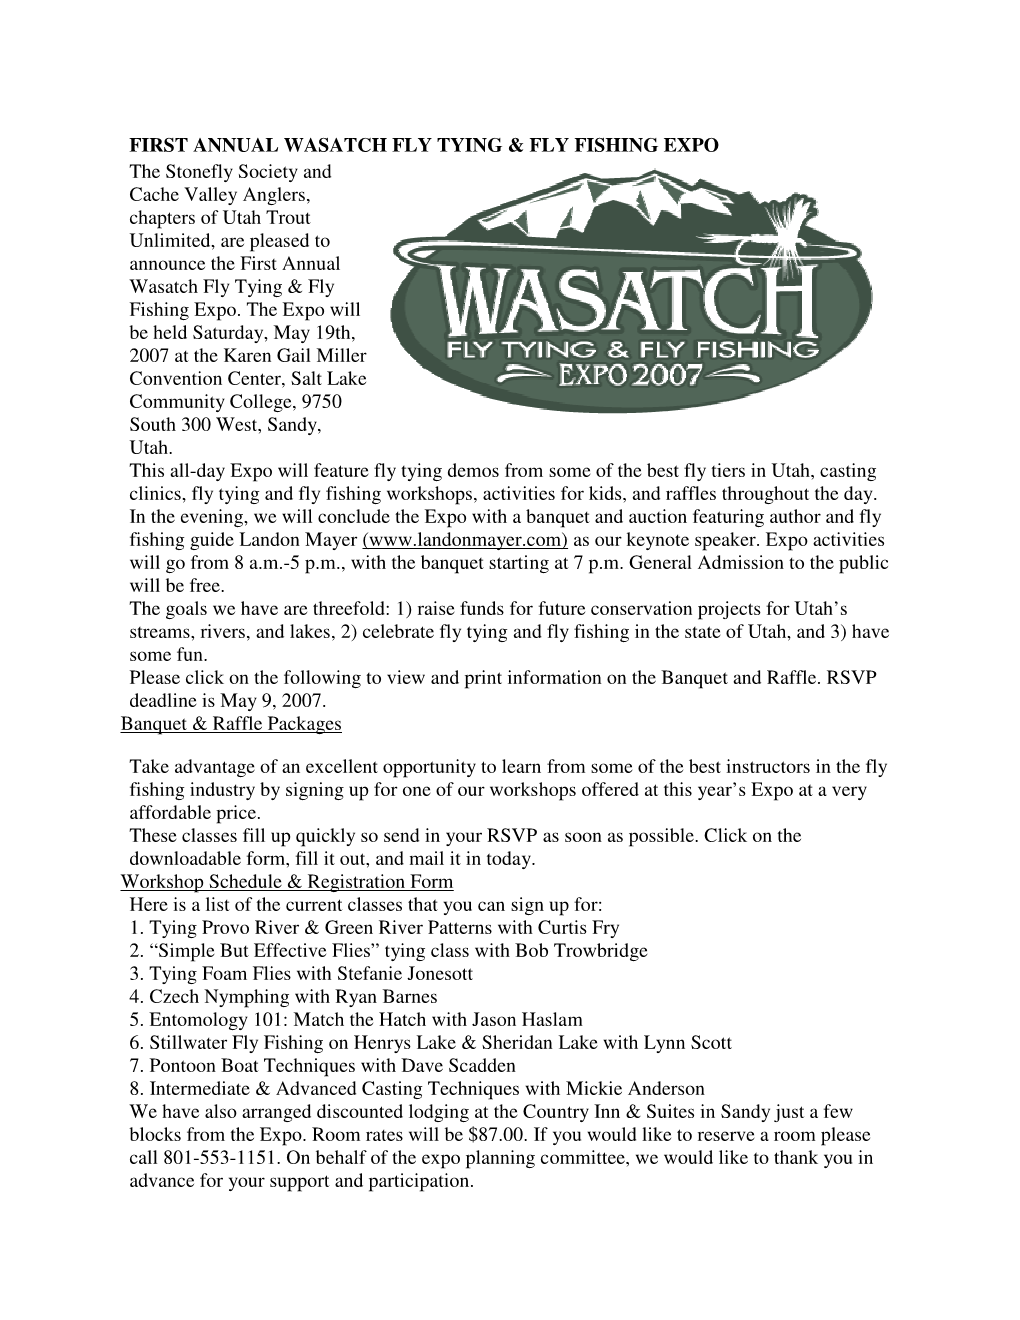 FIRST ANNUAL WASATCH FLY TYING & FLY FISHING EXPO The